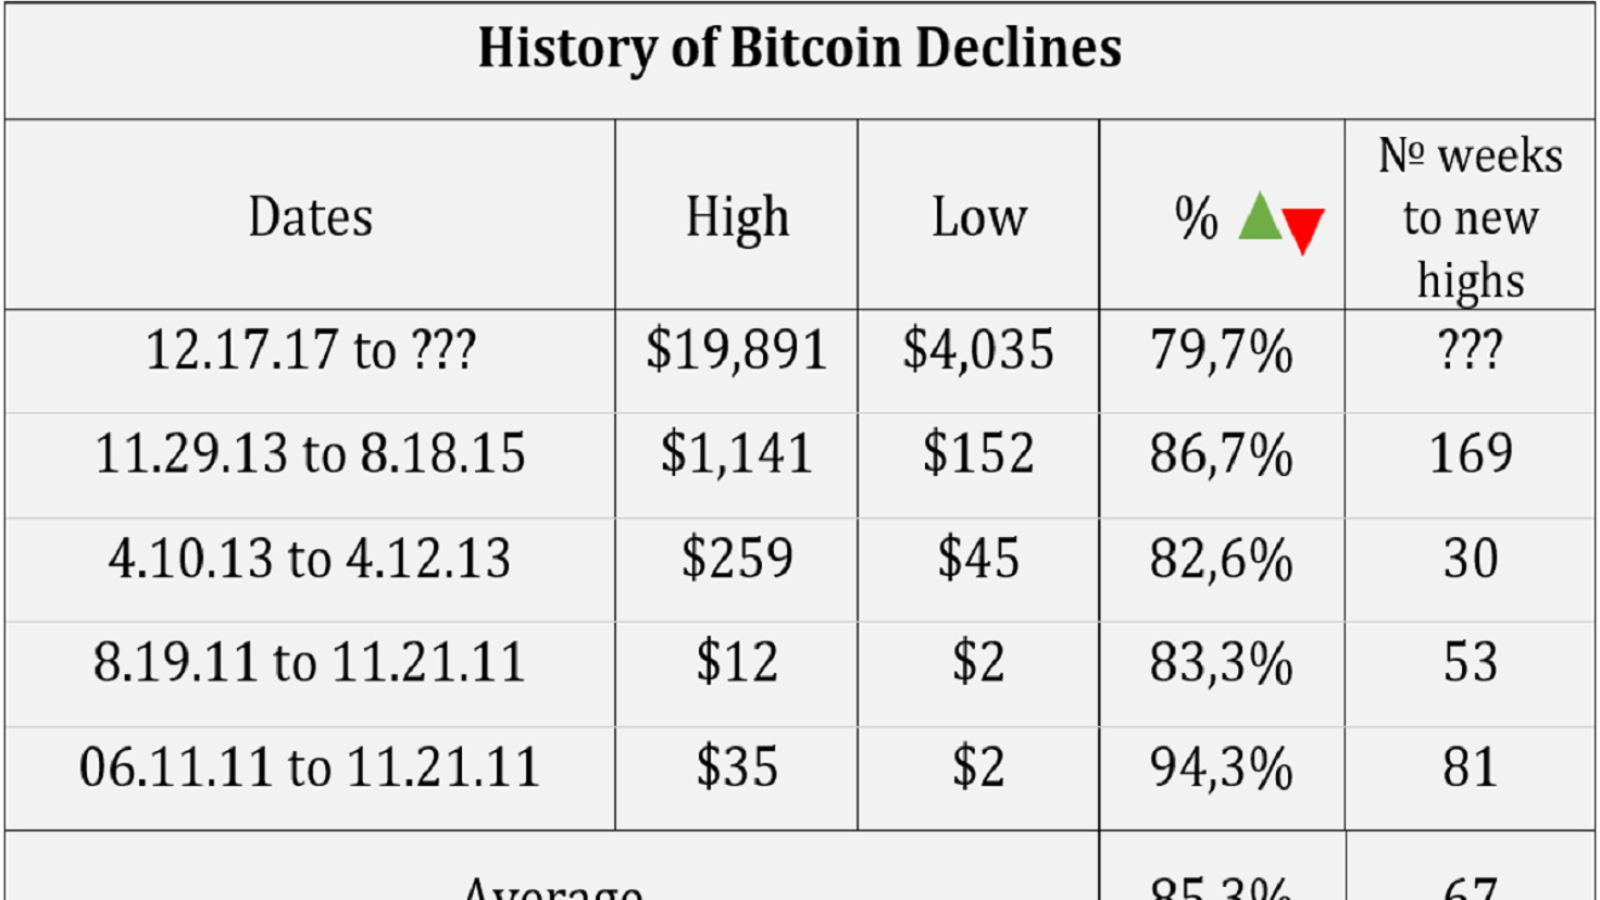 History of Bitcoin Declines